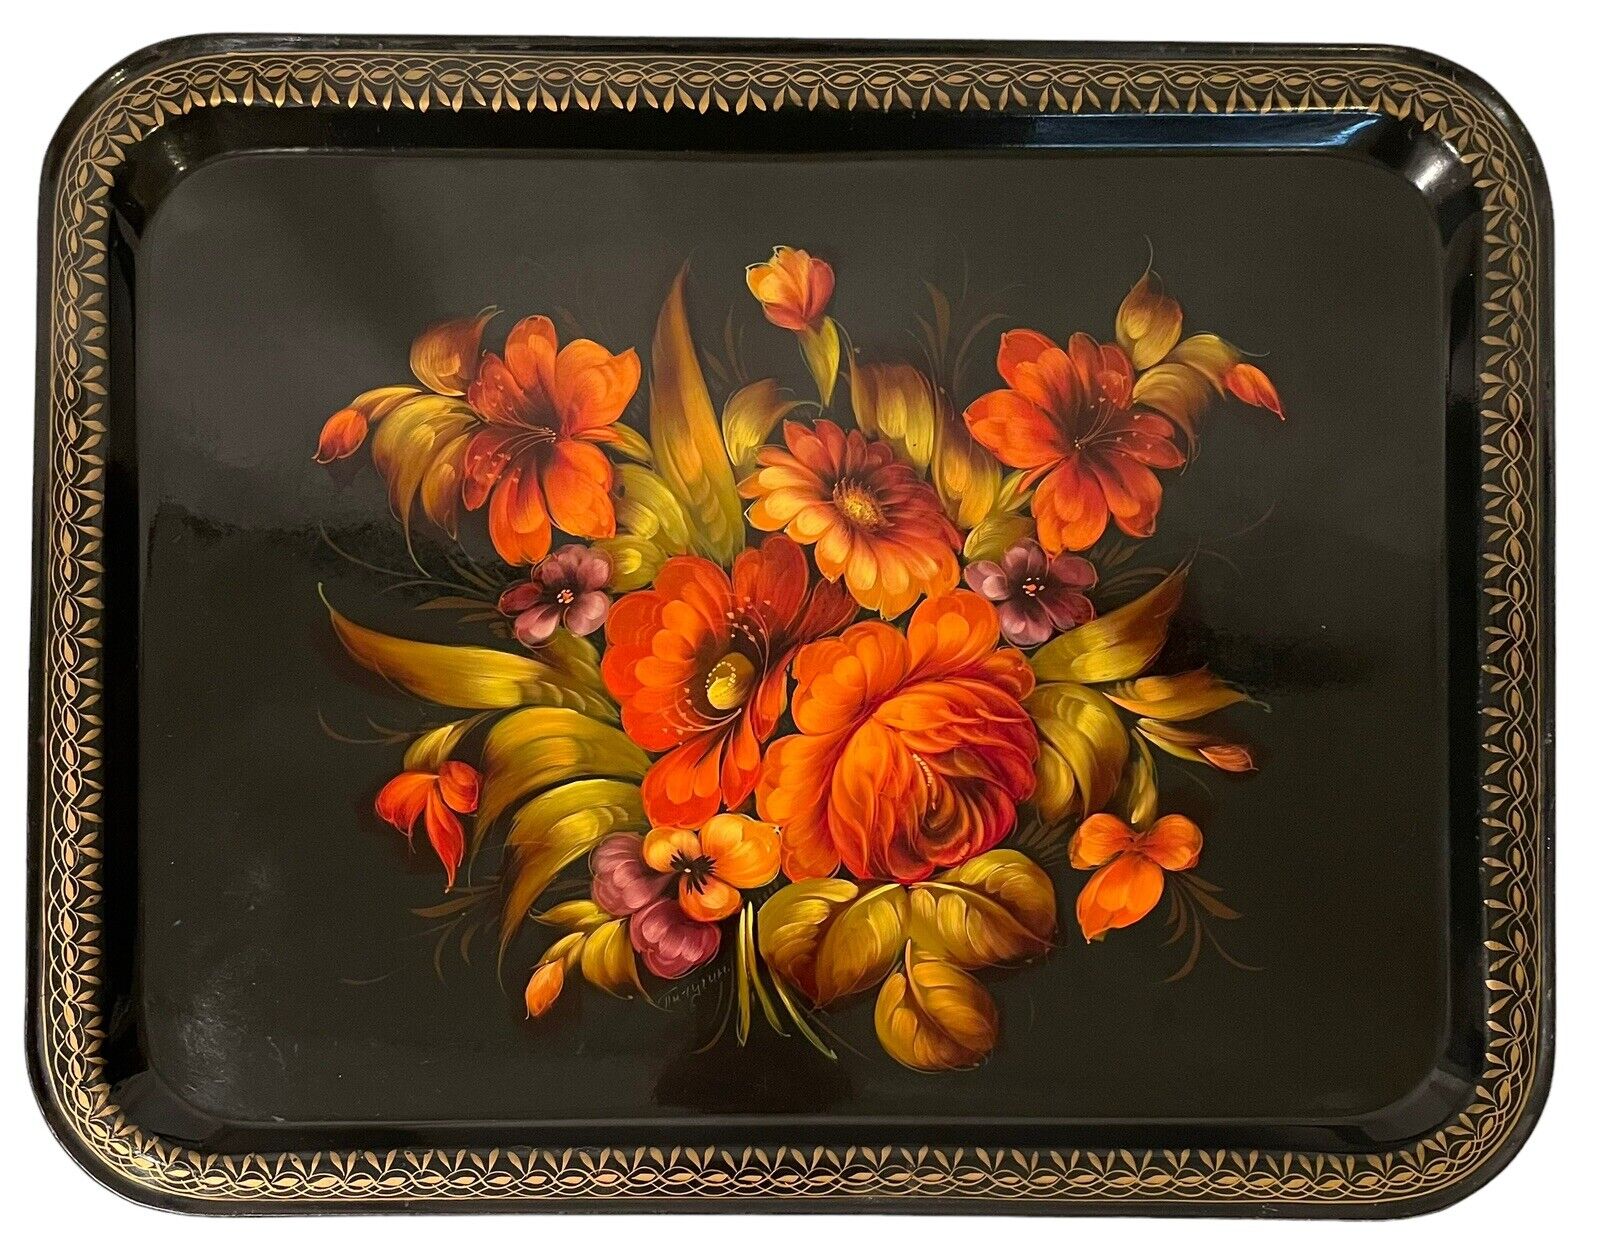 Vintage Russia Tole Metal Tray Floral Yellow Orange Black Zhostovo Artist Signed